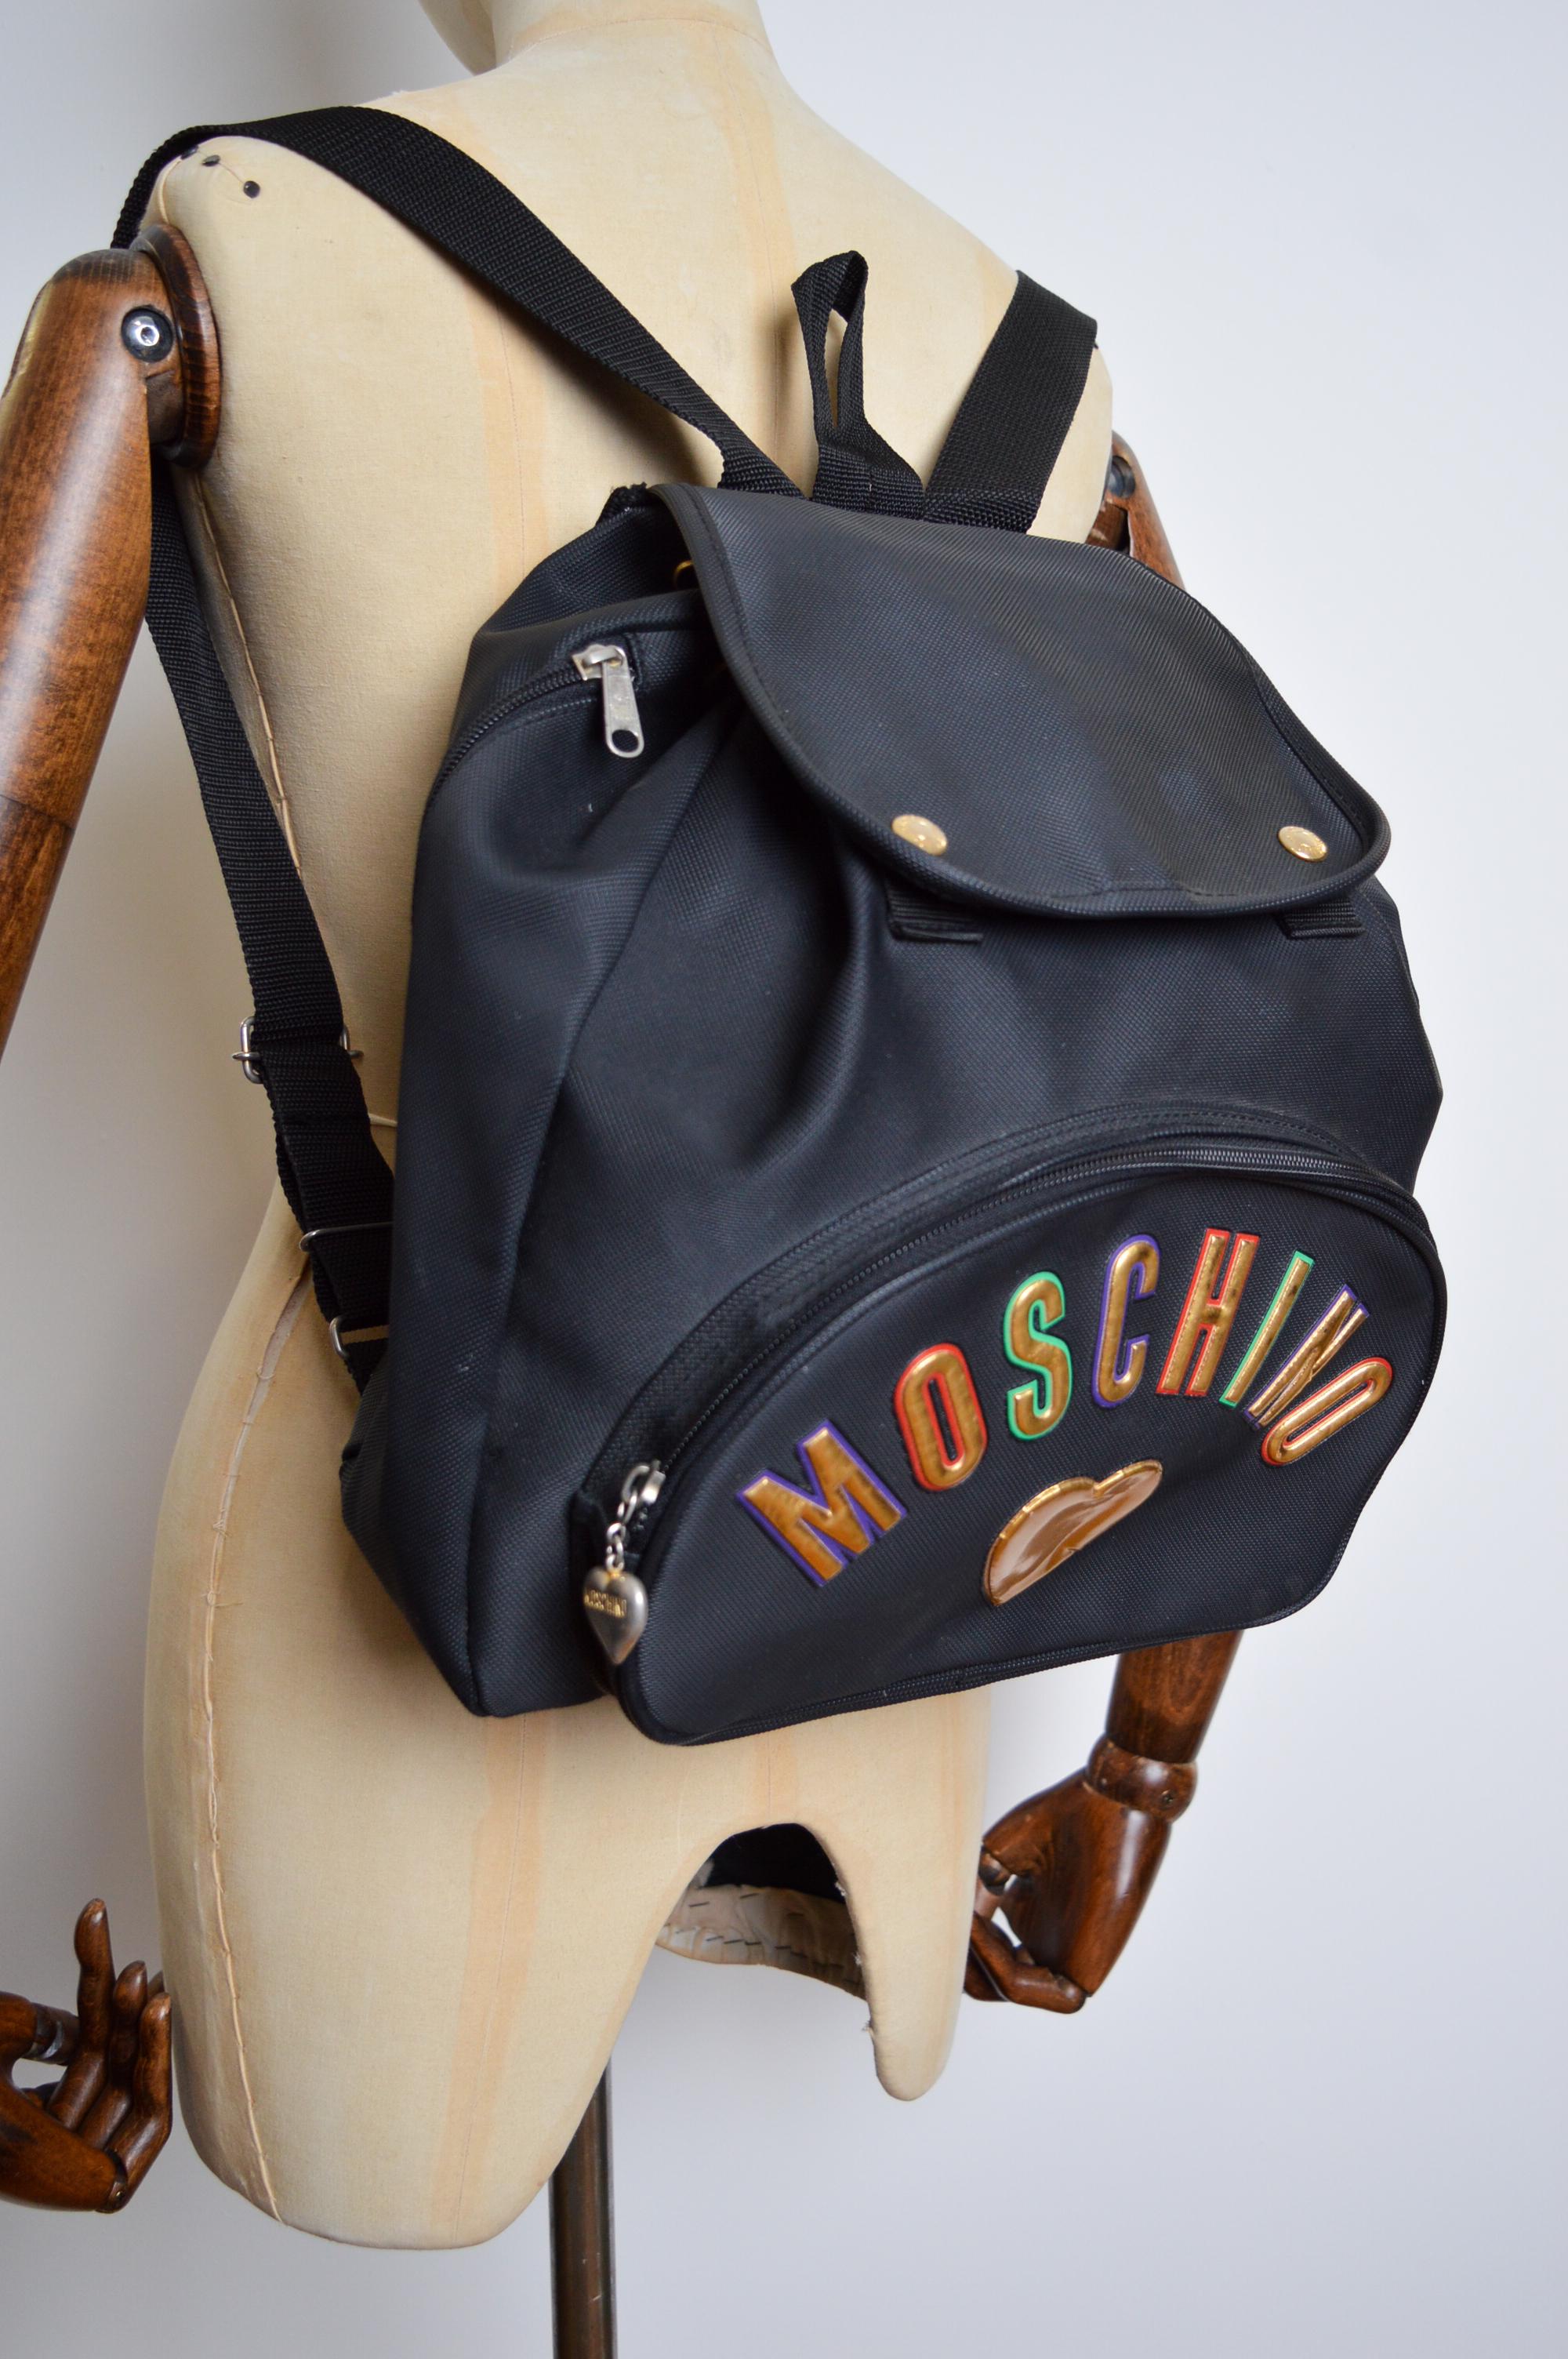 Vintage 1990's Moschino black Vinyl Backpack bag, with large 'MOSCHINO' lettering.   An Iconic nineties Vintage Piece !   

MADE IN ITALY !   

Features: Large 'MOSCHINO' spell out letters, Top Handle, Single Zip fasten compartment, Adjustable draw